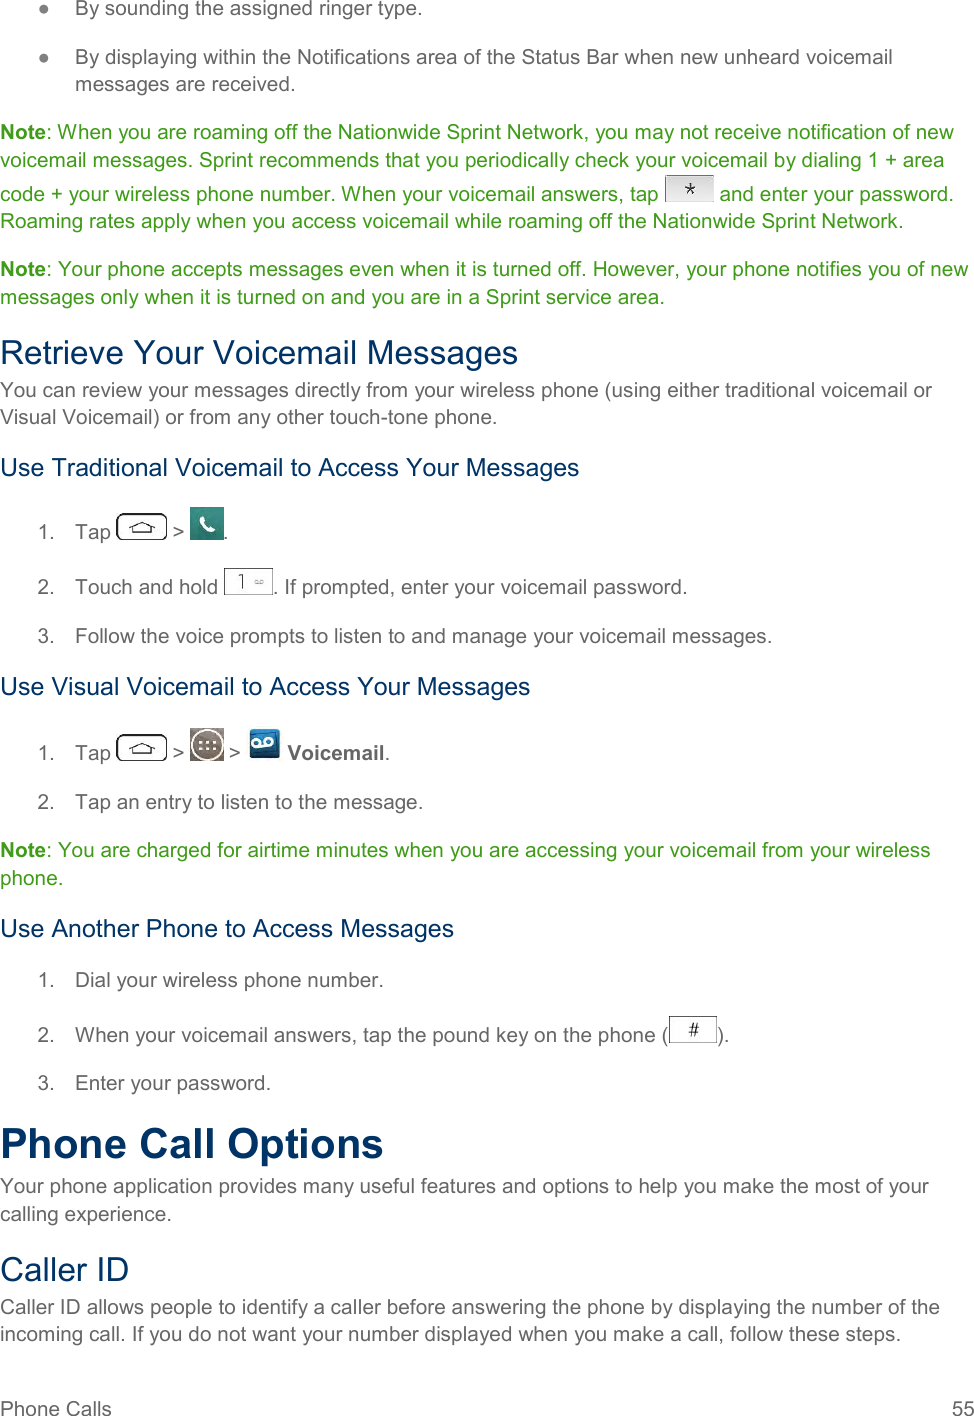 Phone Calls  55 ●  By sounding the assigned ringer type. ●  By displaying within the Notifications area of the Status Bar when new unheard voicemail messages are received. Note: When you are roaming off the Nationwide Sprint Network, you may not receive notification of new voicemail messages. Sprint recommends that you periodically check your voicemail by dialing 1 + area code + your wireless phone number. When your voicemail answers, tap   and enter your password. Roaming rates apply when you access voicemail while roaming off the Nationwide Sprint Network. Note: Your phone accepts messages even when it is turned off. However, your phone notifies you of new messages only when it is turned on and you are in a Sprint service area. Retrieve Your Voicemail Messages You can review your messages directly from your wireless phone (using either traditional voicemail or Visual Voicemail) or from any other touch-tone phone. Use Traditional Voicemail to Access Your Messages 1.  Tap   &gt;  . 2.  Touch and hold  . If prompted, enter your voicemail password. 3.  Follow the voice prompts to listen to and manage your voicemail messages. Use Visual Voicemail to Access Your Messages 1.  Tap   &gt;   &gt;   Voicemail. 2.  Tap an entry to listen to the message. Note: You are charged for airtime minutes when you are accessing your voicemail from your wireless phone. Use Another Phone to Access Messages 1.  Dial your wireless phone number. 2.  When your voicemail answers, tap the pound key on the phone ( ). 3.  Enter your password.  Phone Call Options Your phone application provides many useful features and options to help you make the most of your calling experience. Caller ID Caller ID allows people to identify a caller before answering the phone by displaying the number of the incoming call. If you do not want your number displayed when you make a call, follow these steps. 